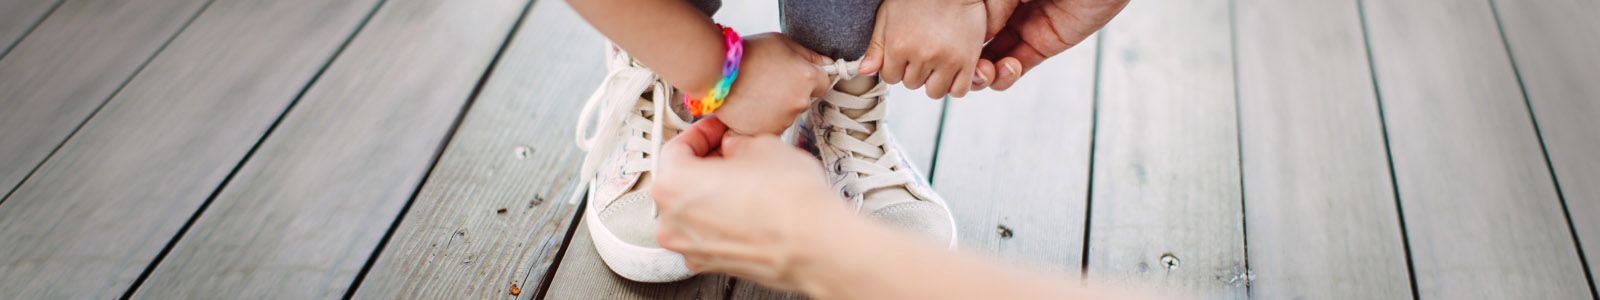 two adult's hands are helping a child fasten the shoelaces